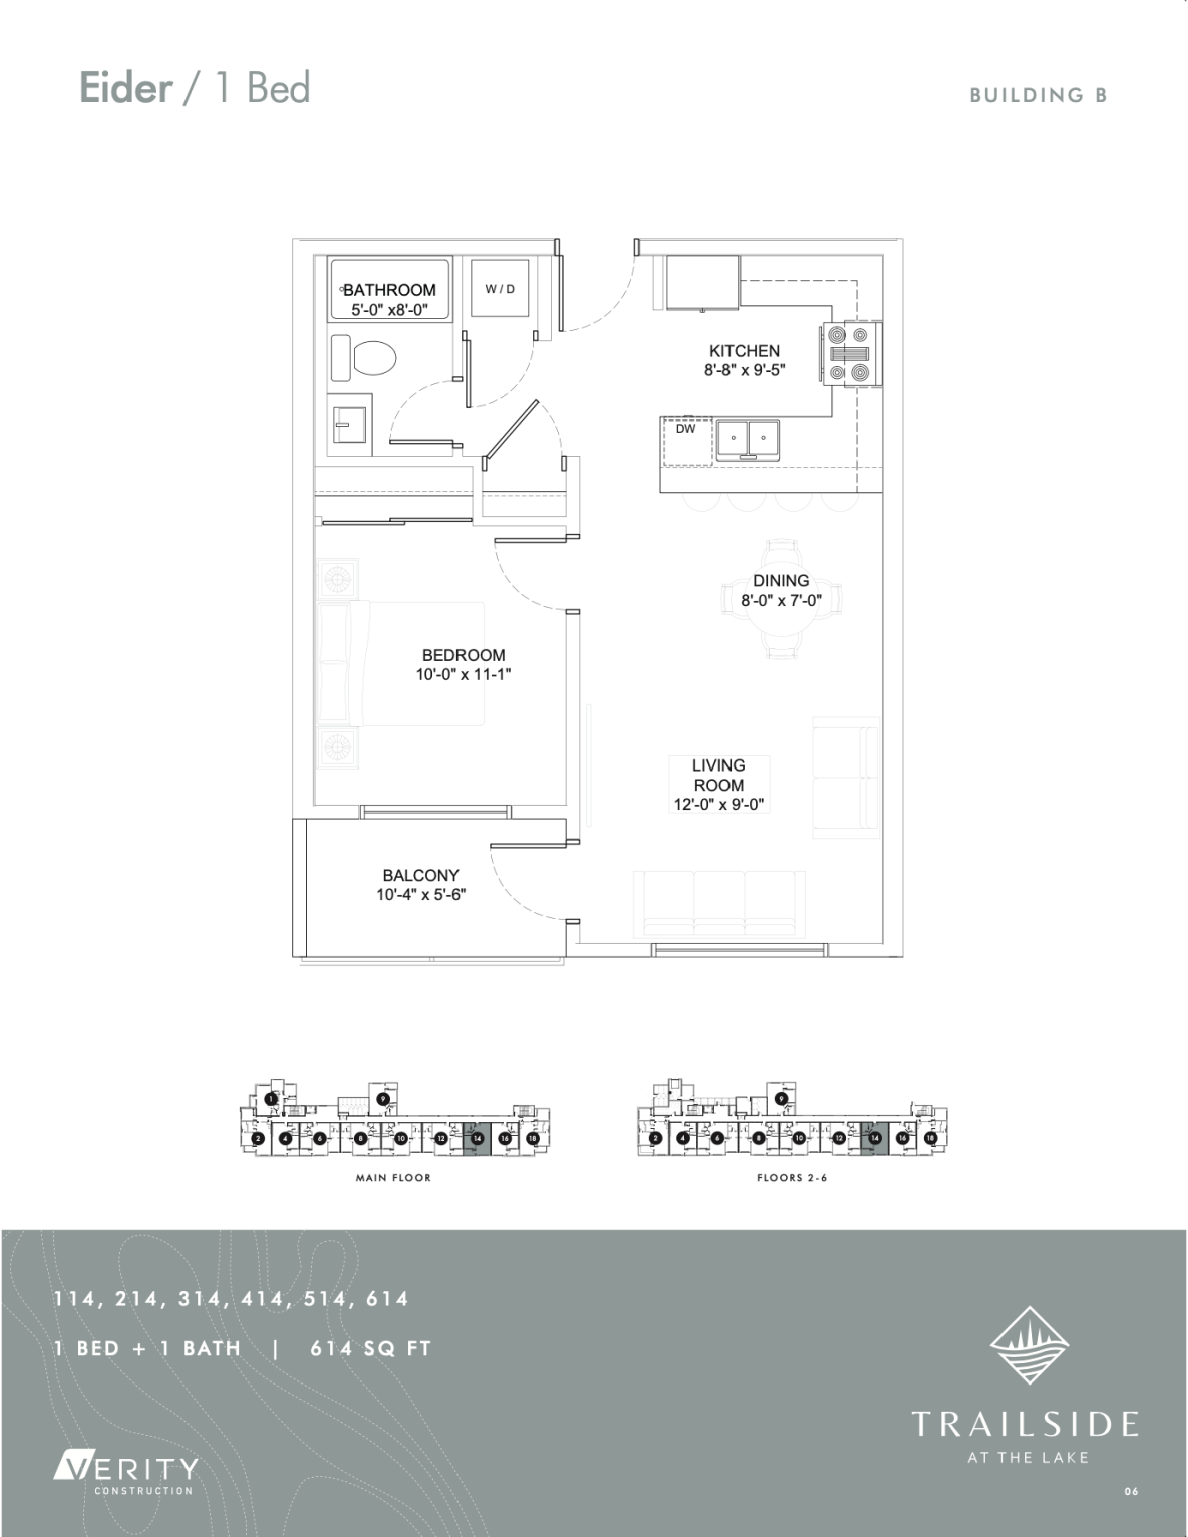 Trailside at the Lake Floor Plan